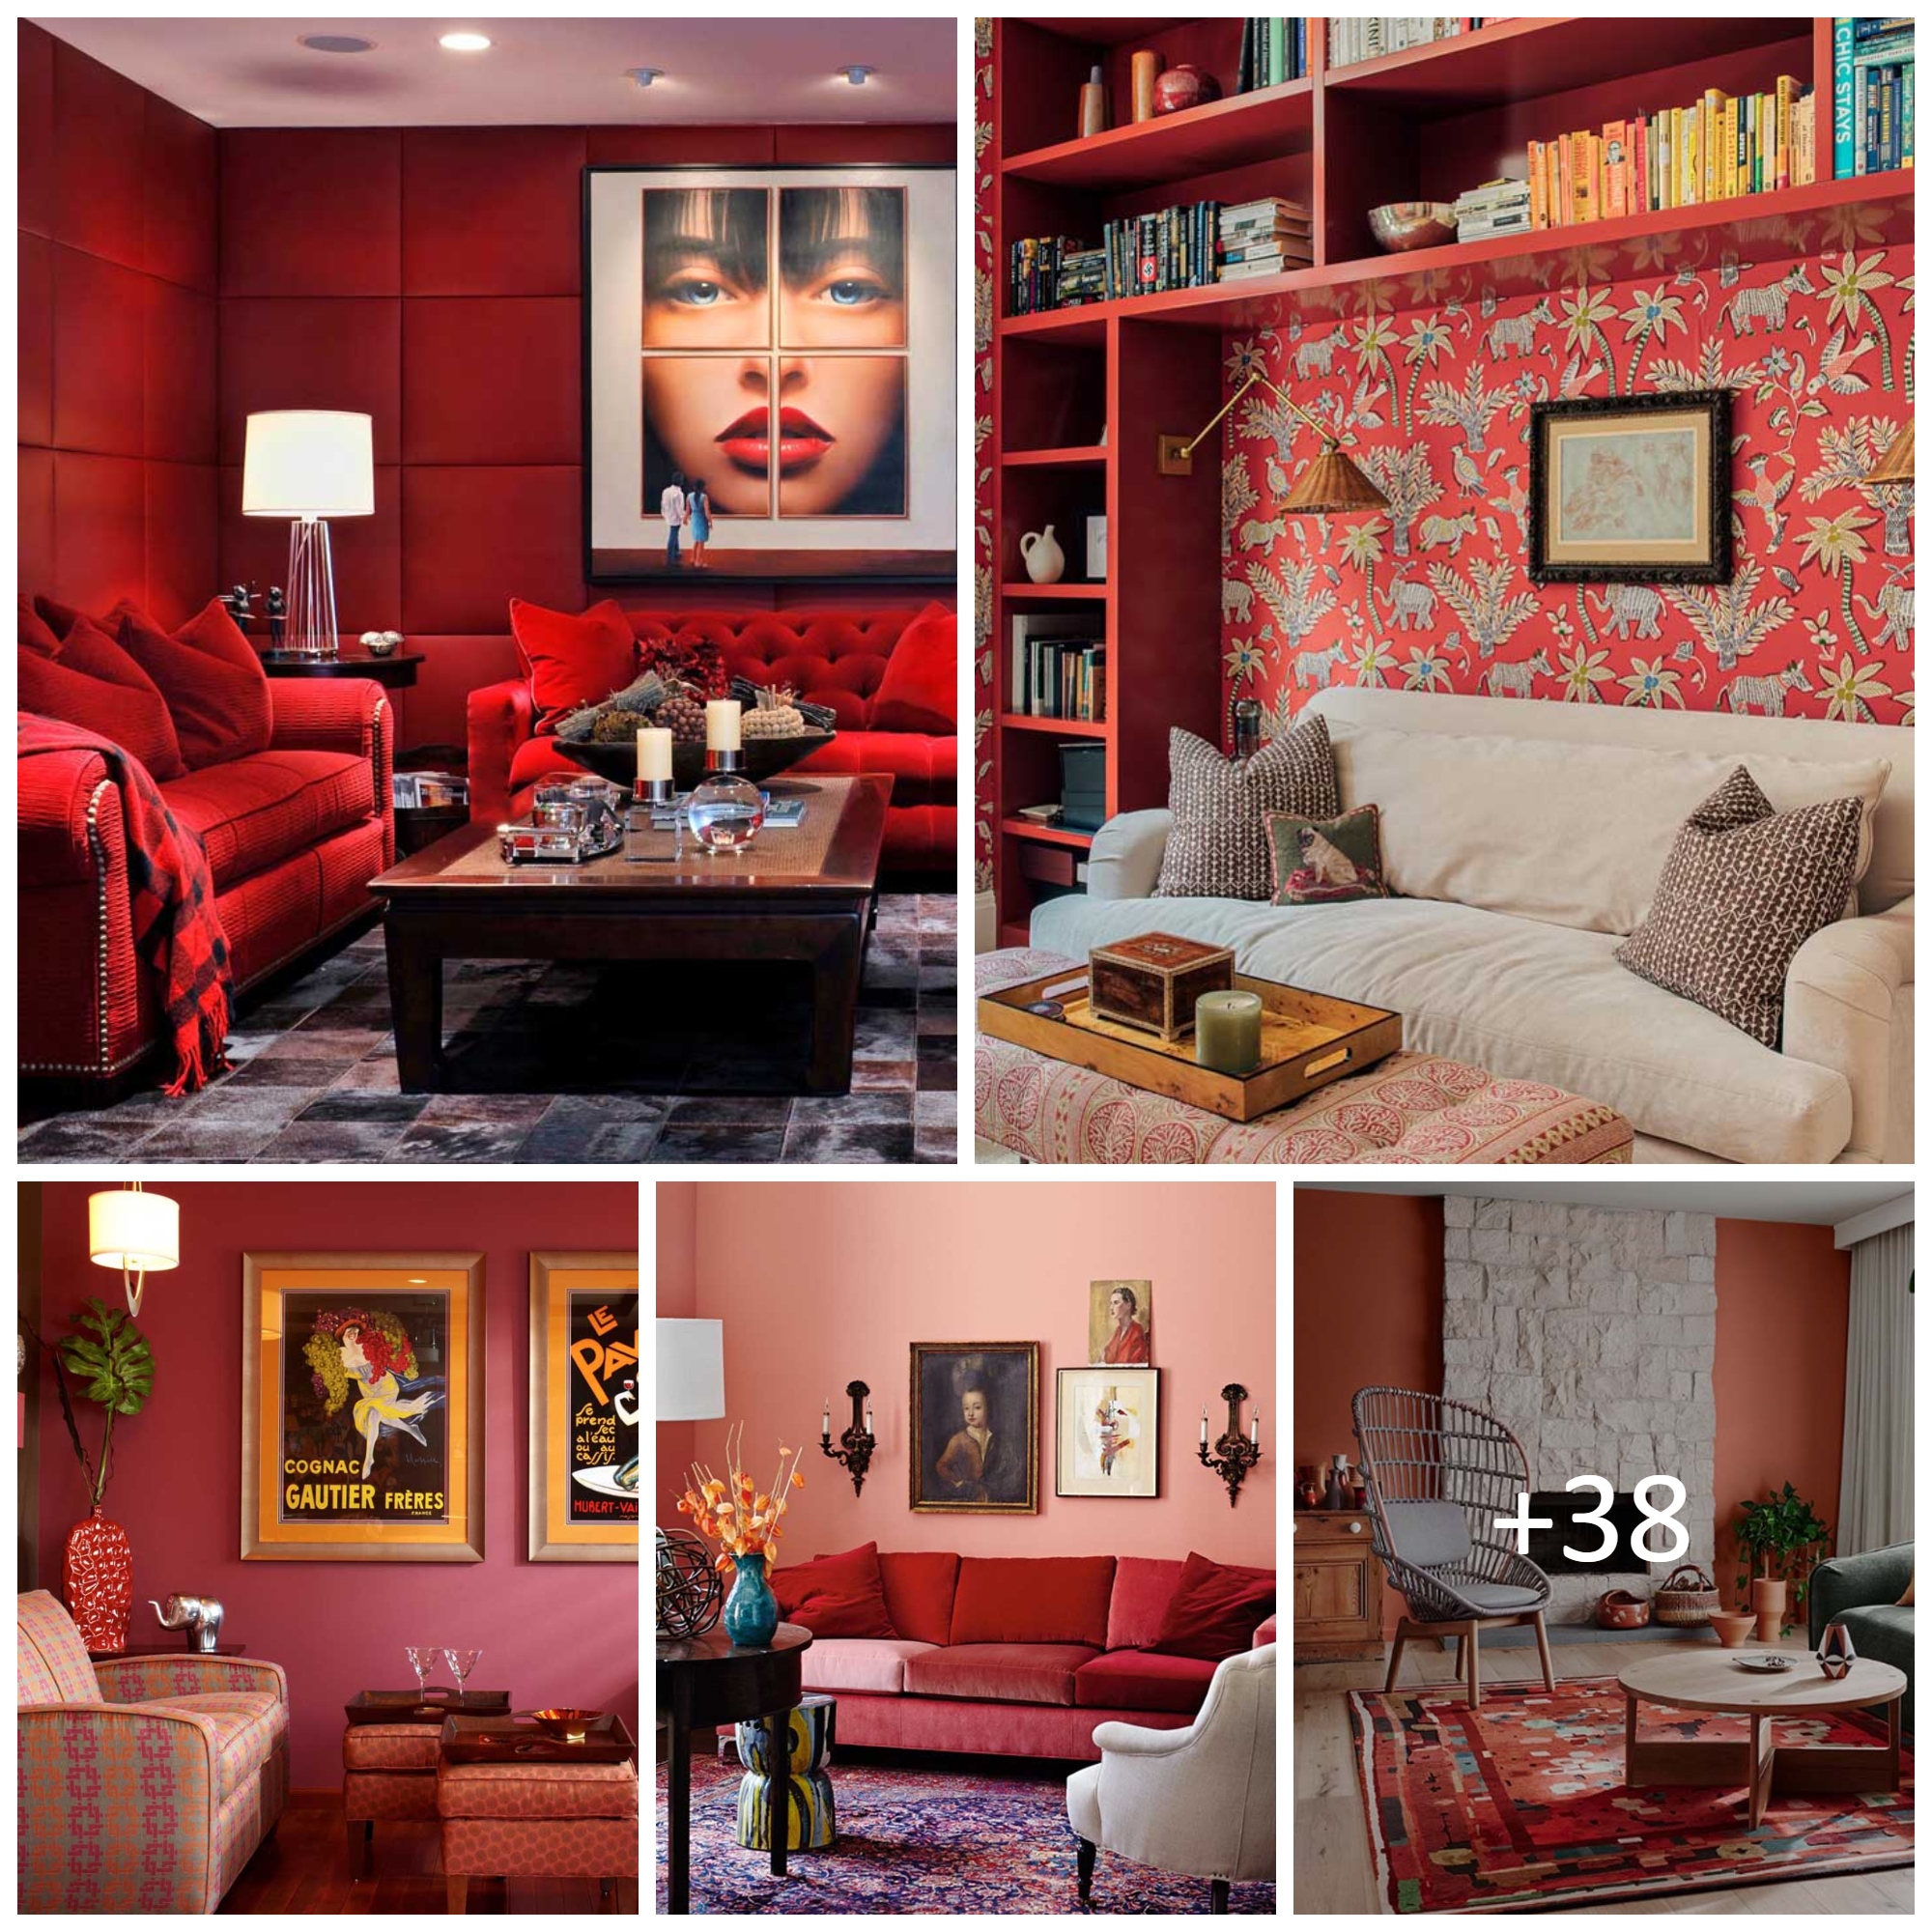 Amazing Red room ideas: see tips for decorating yours and inspiring photos